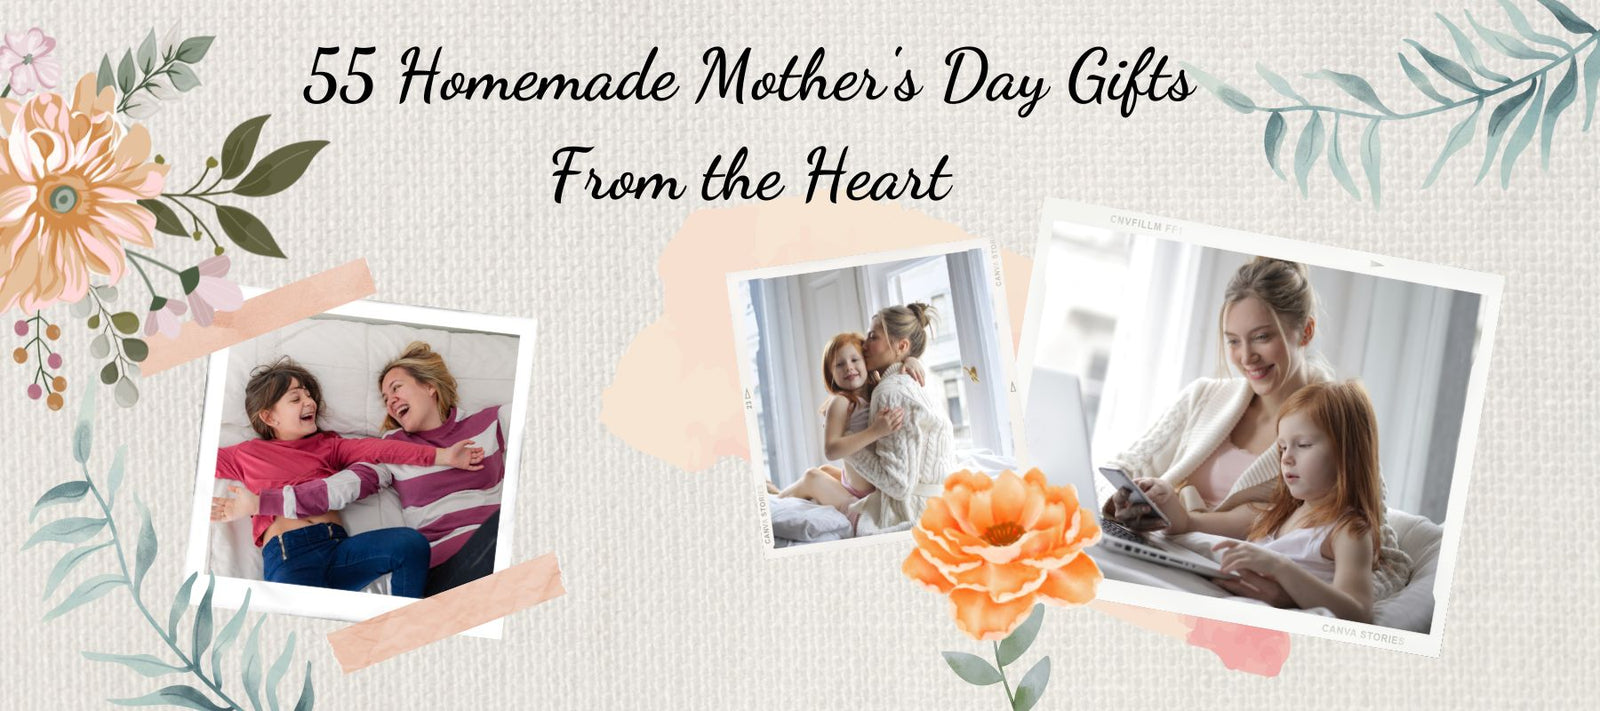 DIY Mother's Day Gifts for a Present From the Heart